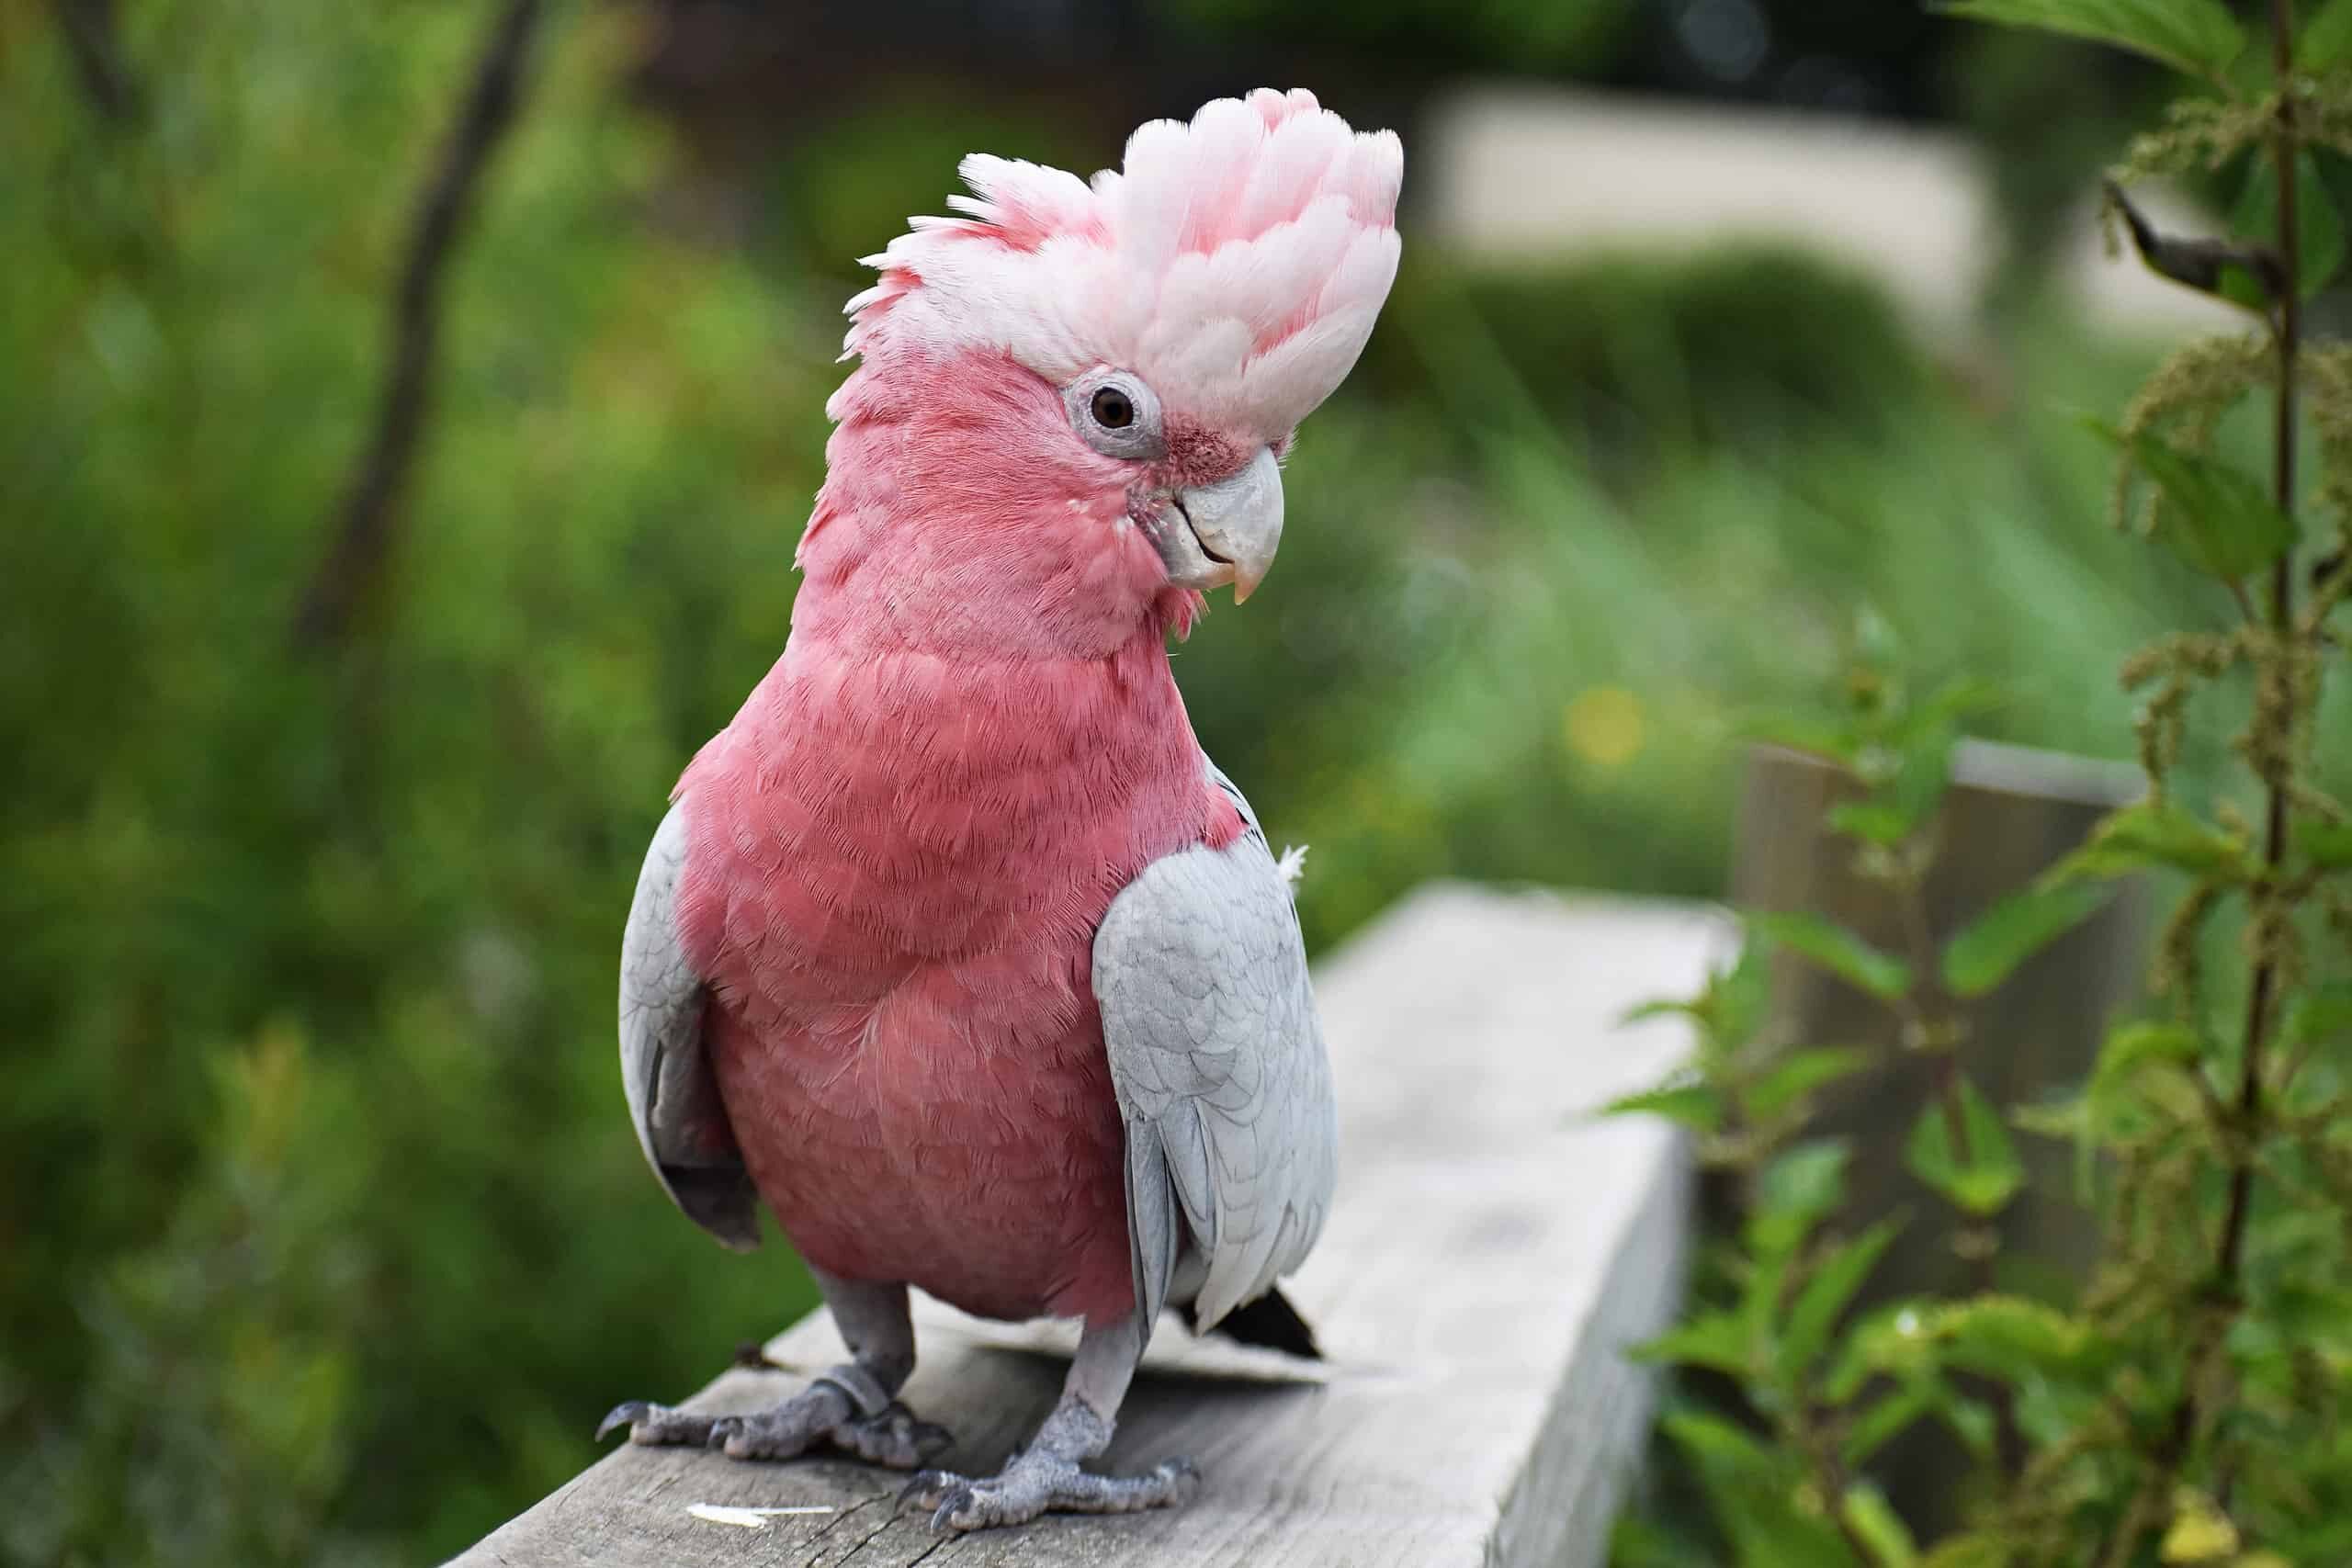 Cockatoo Prices in 2023: Purchase Cost, Supplies, Food, and More